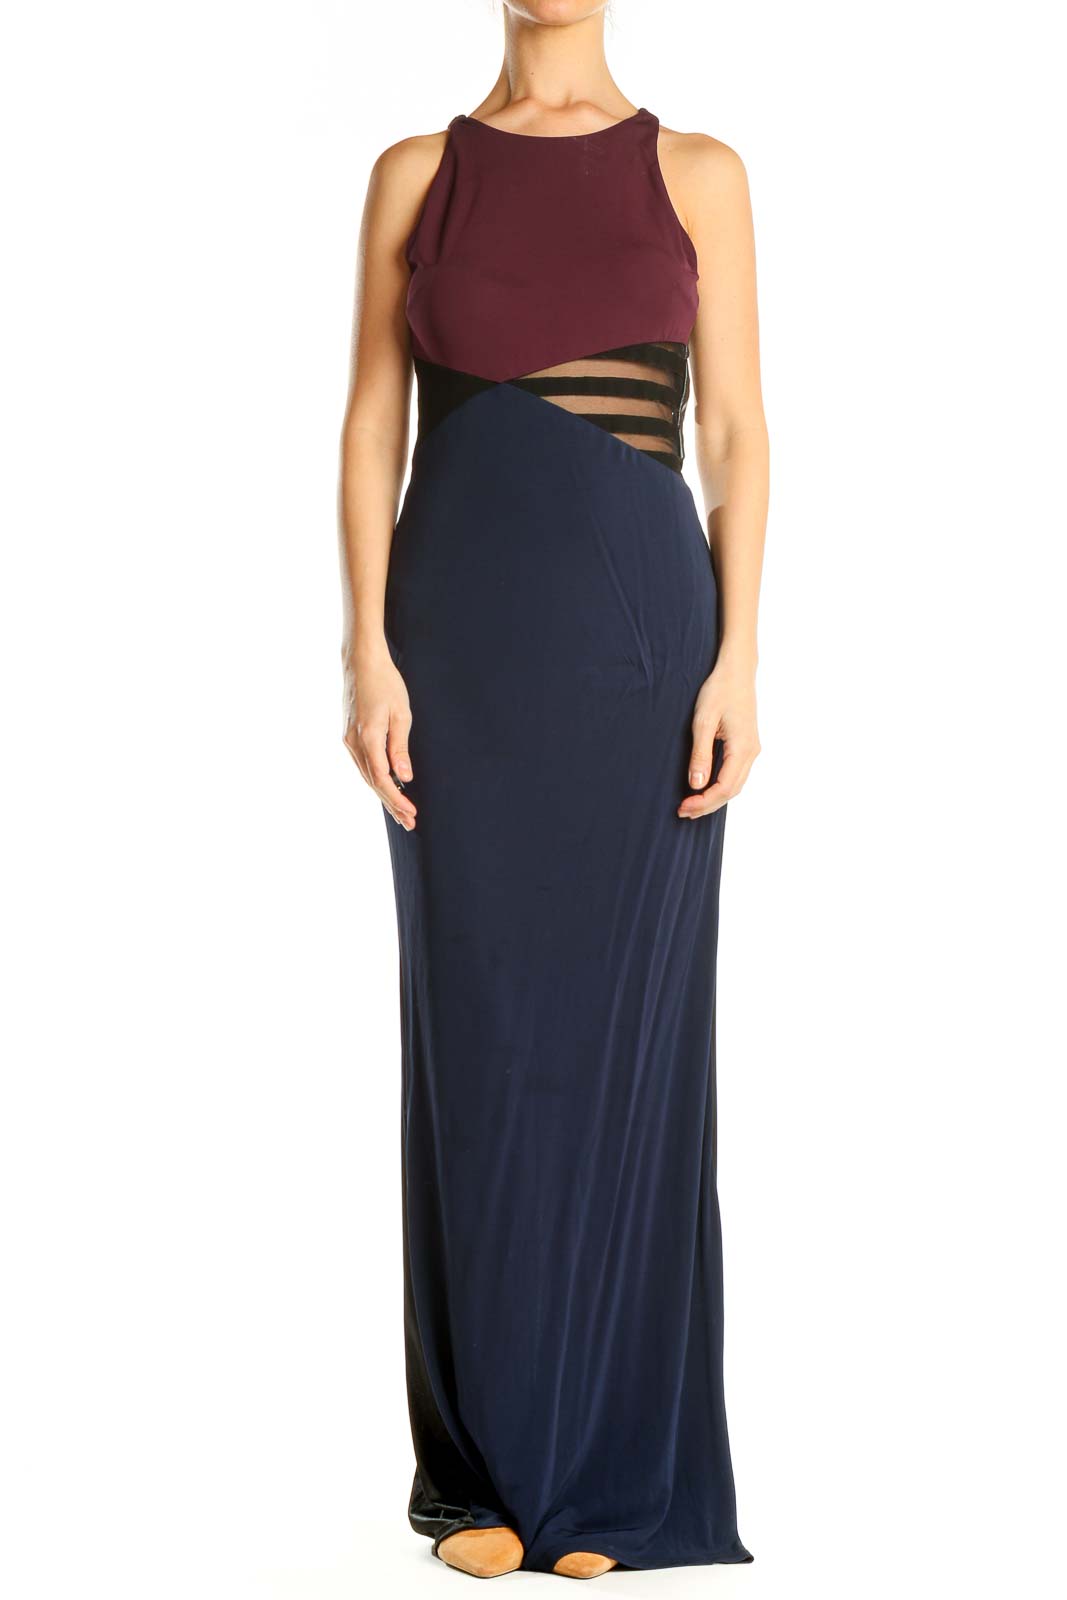 Blue Colorblock Chic Column Dress with Mesh Panel Front